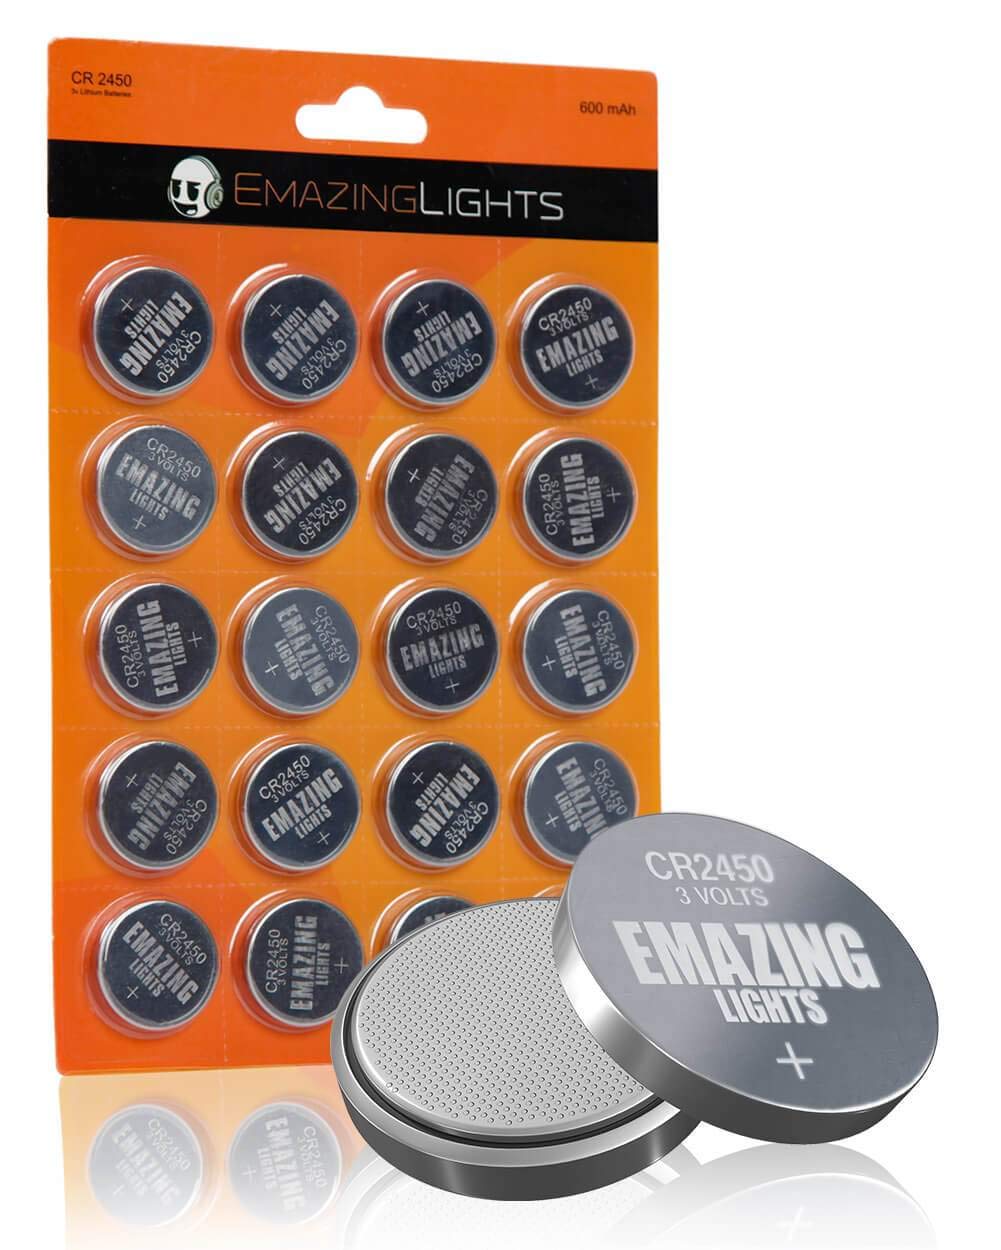 EmazingLights CR2450 Batteries 3 Volt Lithium Coin Cell 3V Button Battery (20 Pack)